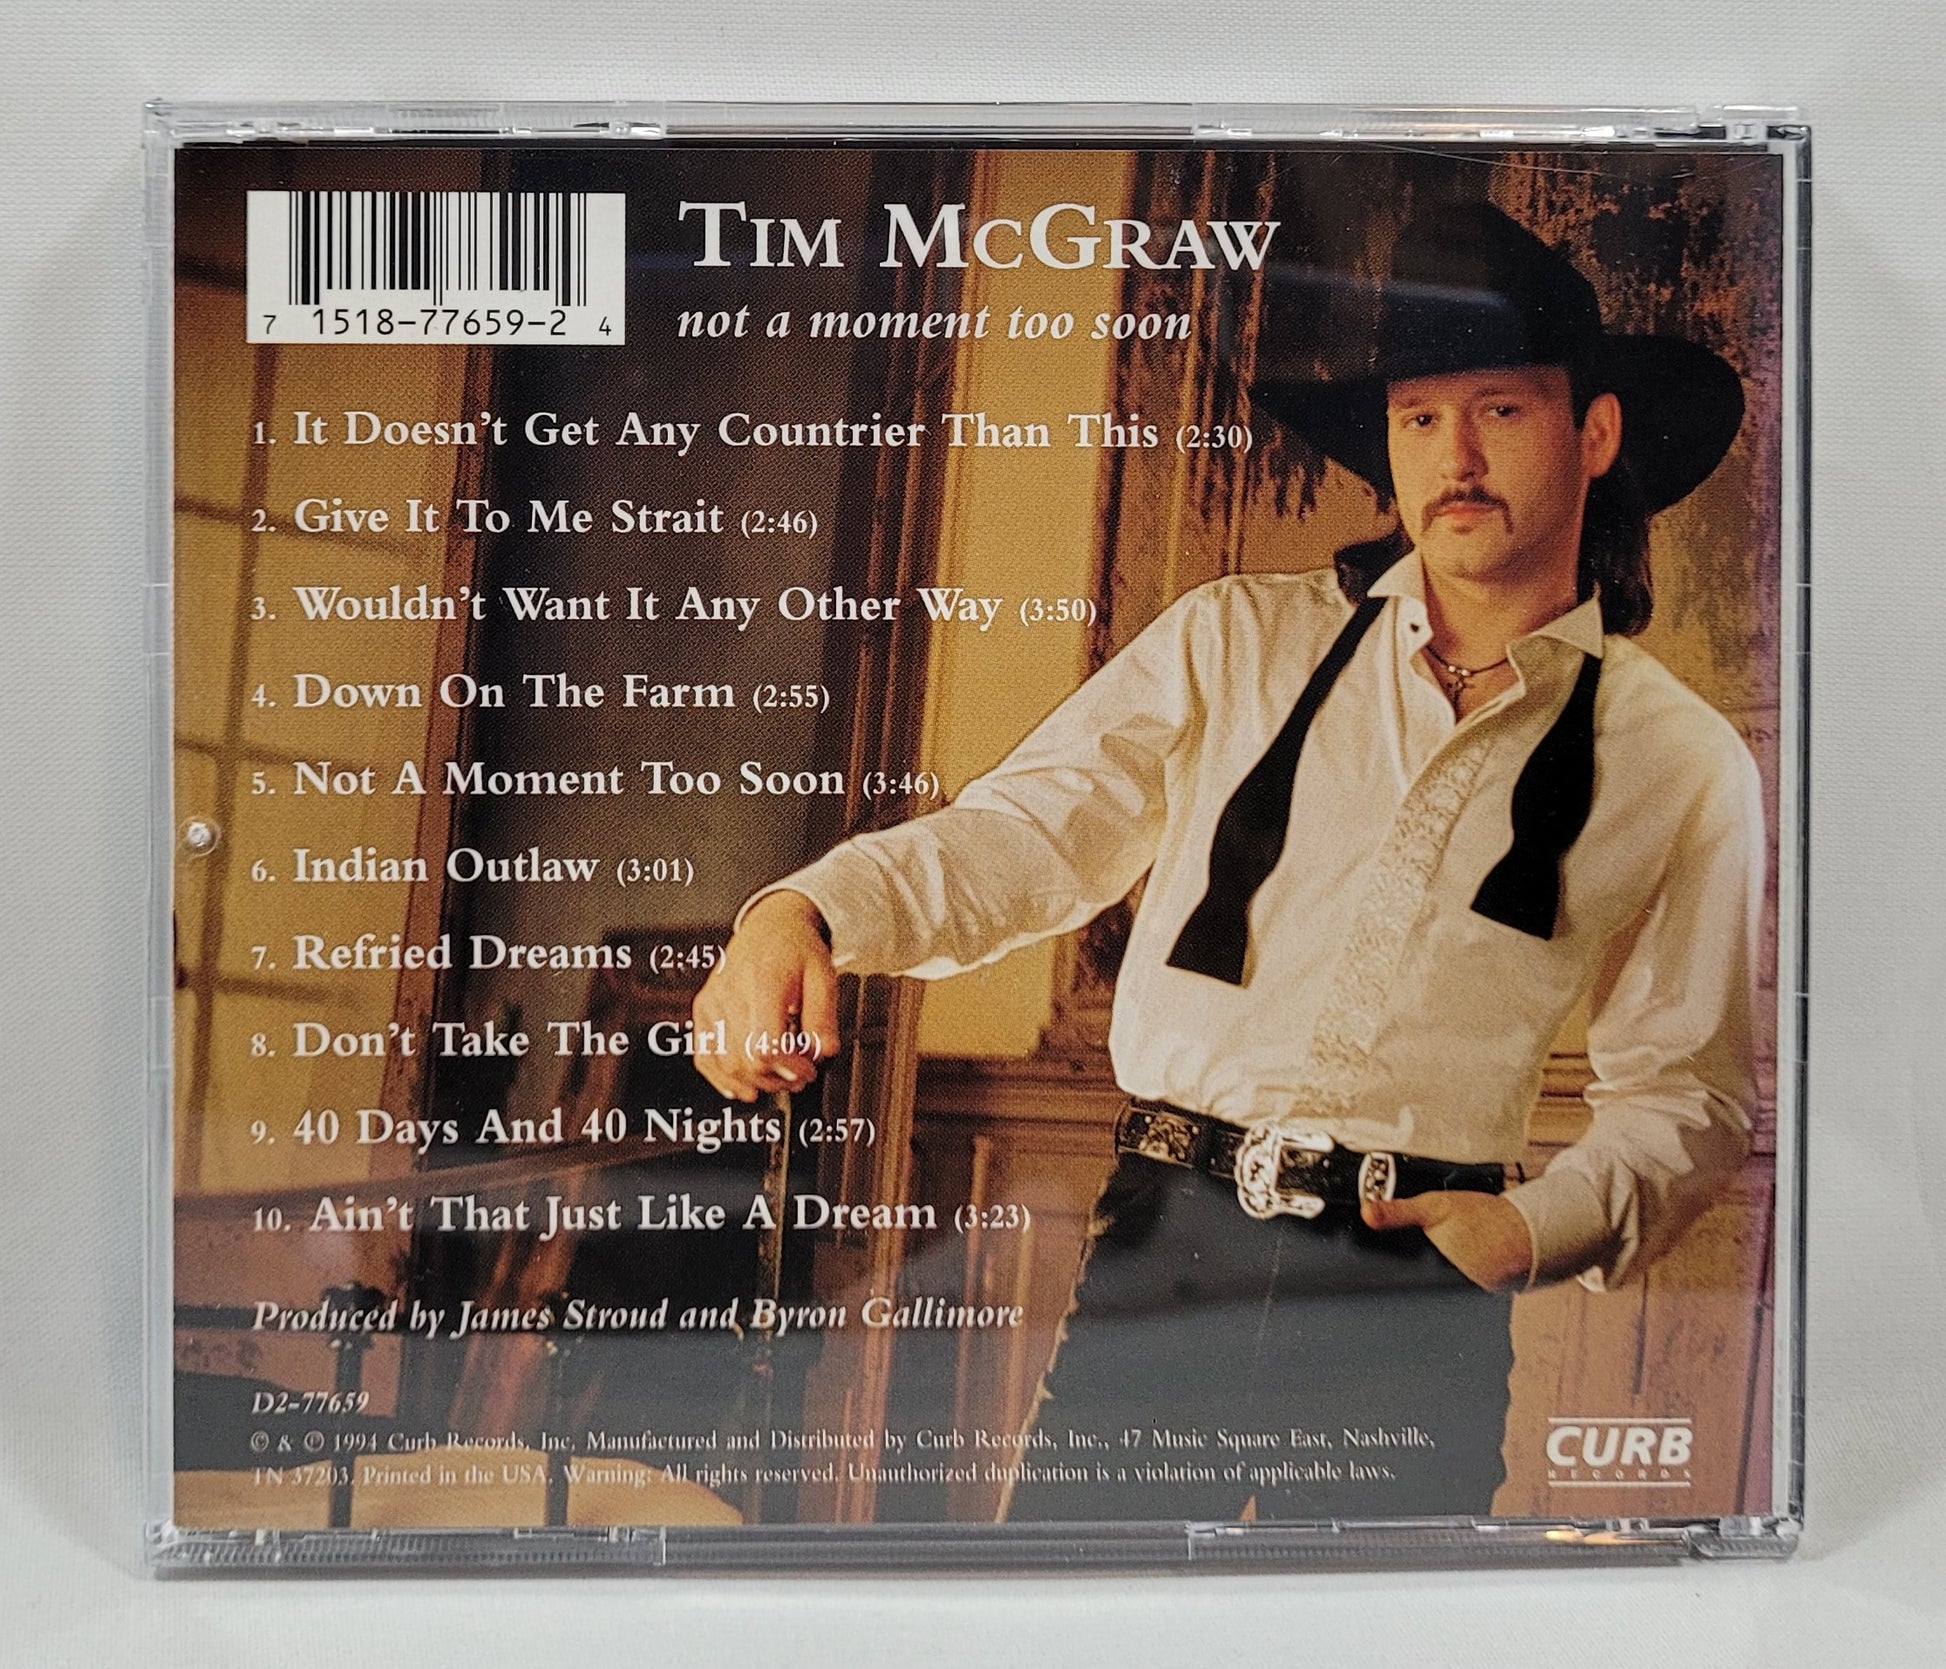 Tim McGraw - Not a Moment Too Soon [1994 Used CD]